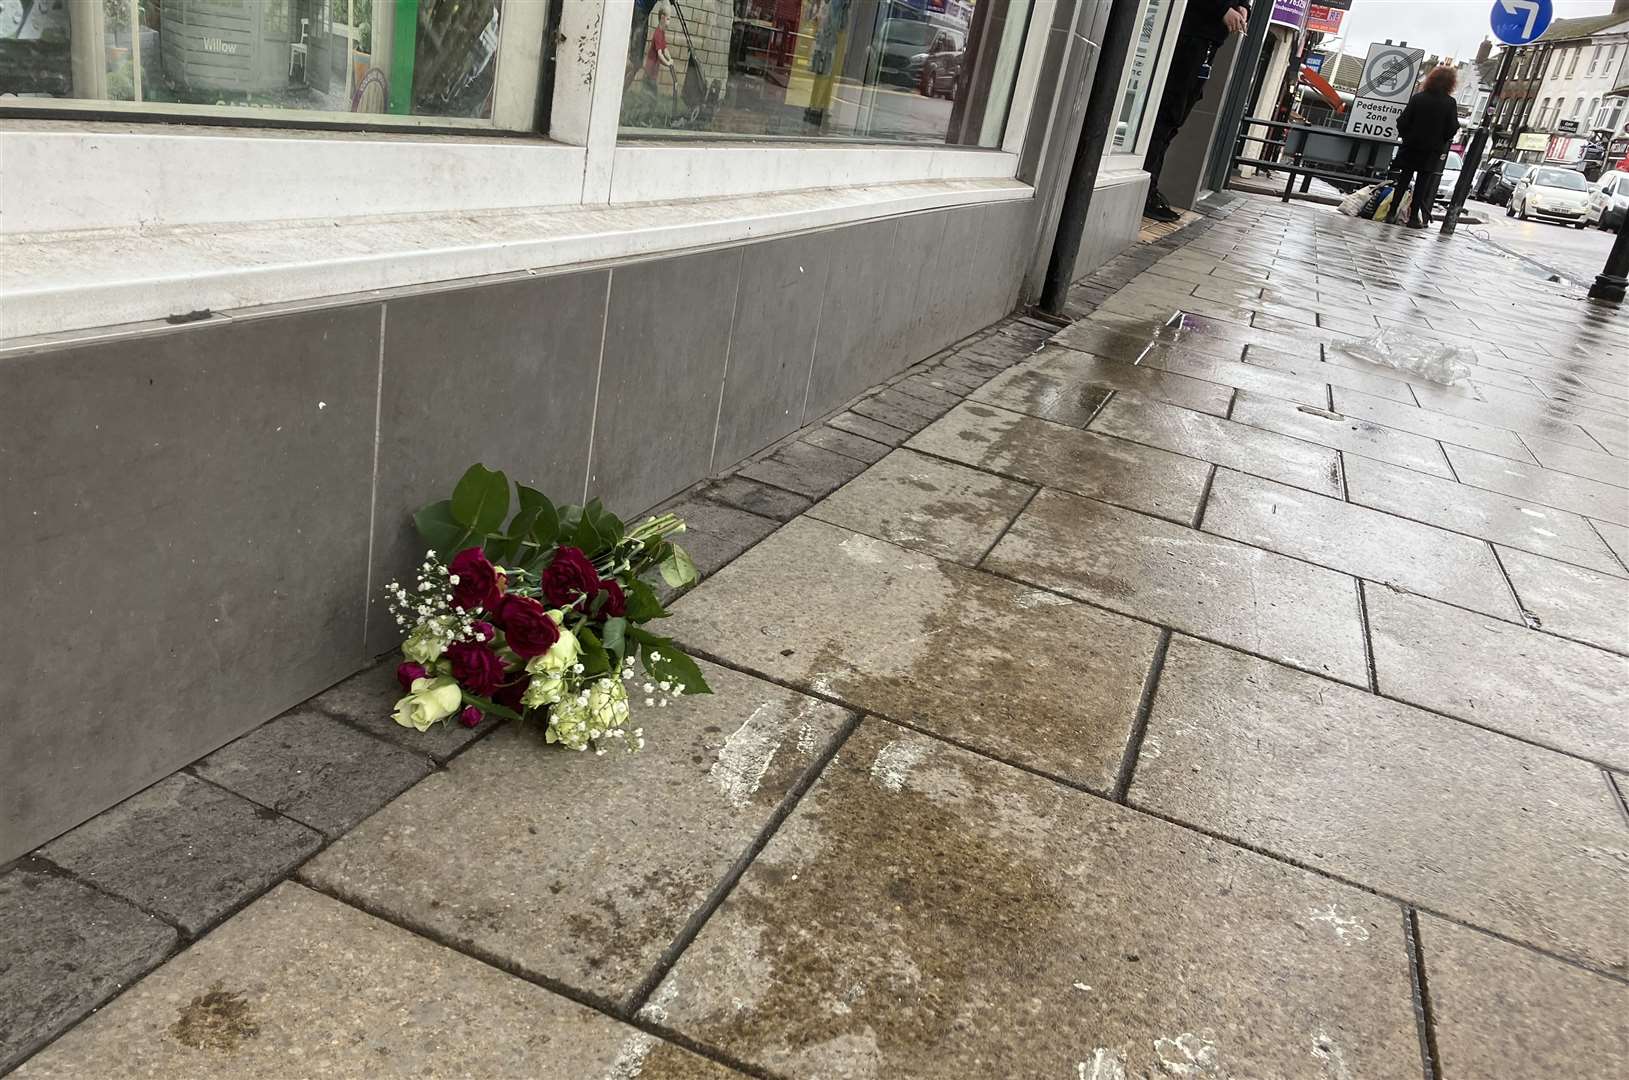 Flowers have been laid outside Wilko